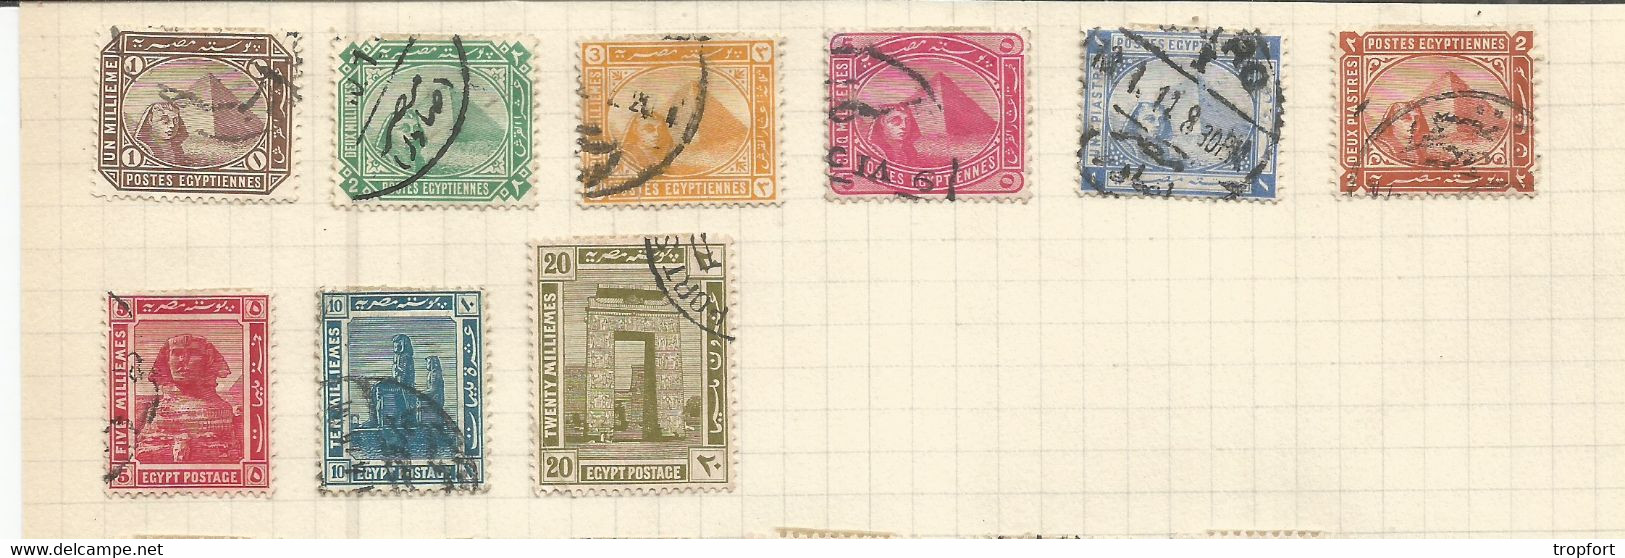 JP / Timbres EGYPTE Lot 25 TIMBRE EGYPT POSTAGE Poste Egyptienne - Voorfilatelie